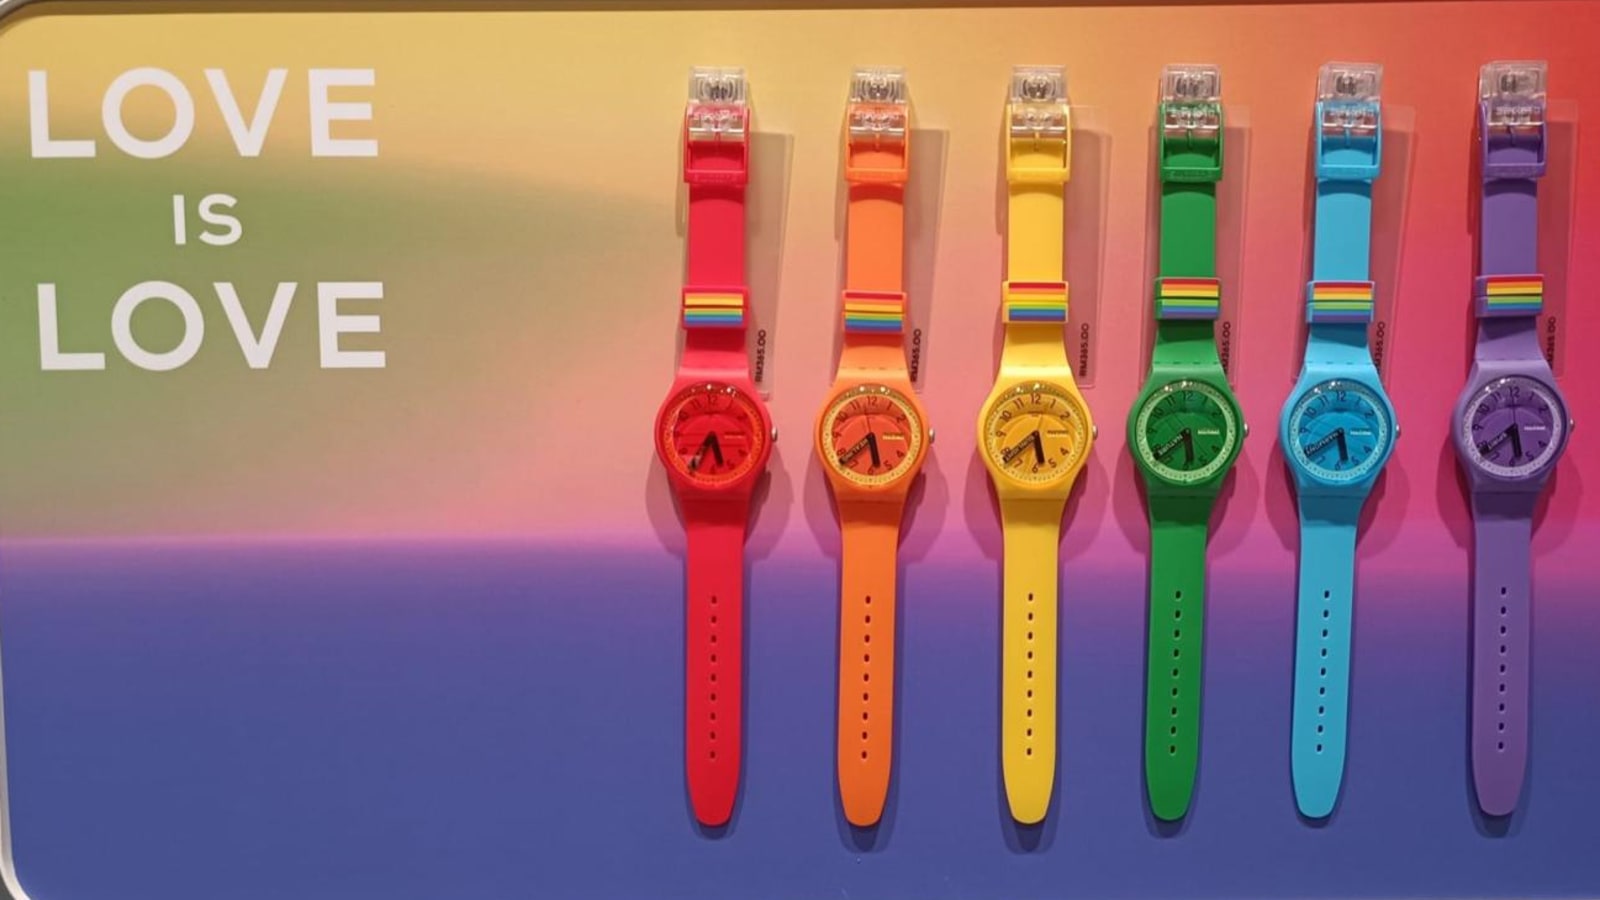 Swatch watches seized by Malaysia's Home Affairs Ministry allegedly had 'LGBTQ' inscription